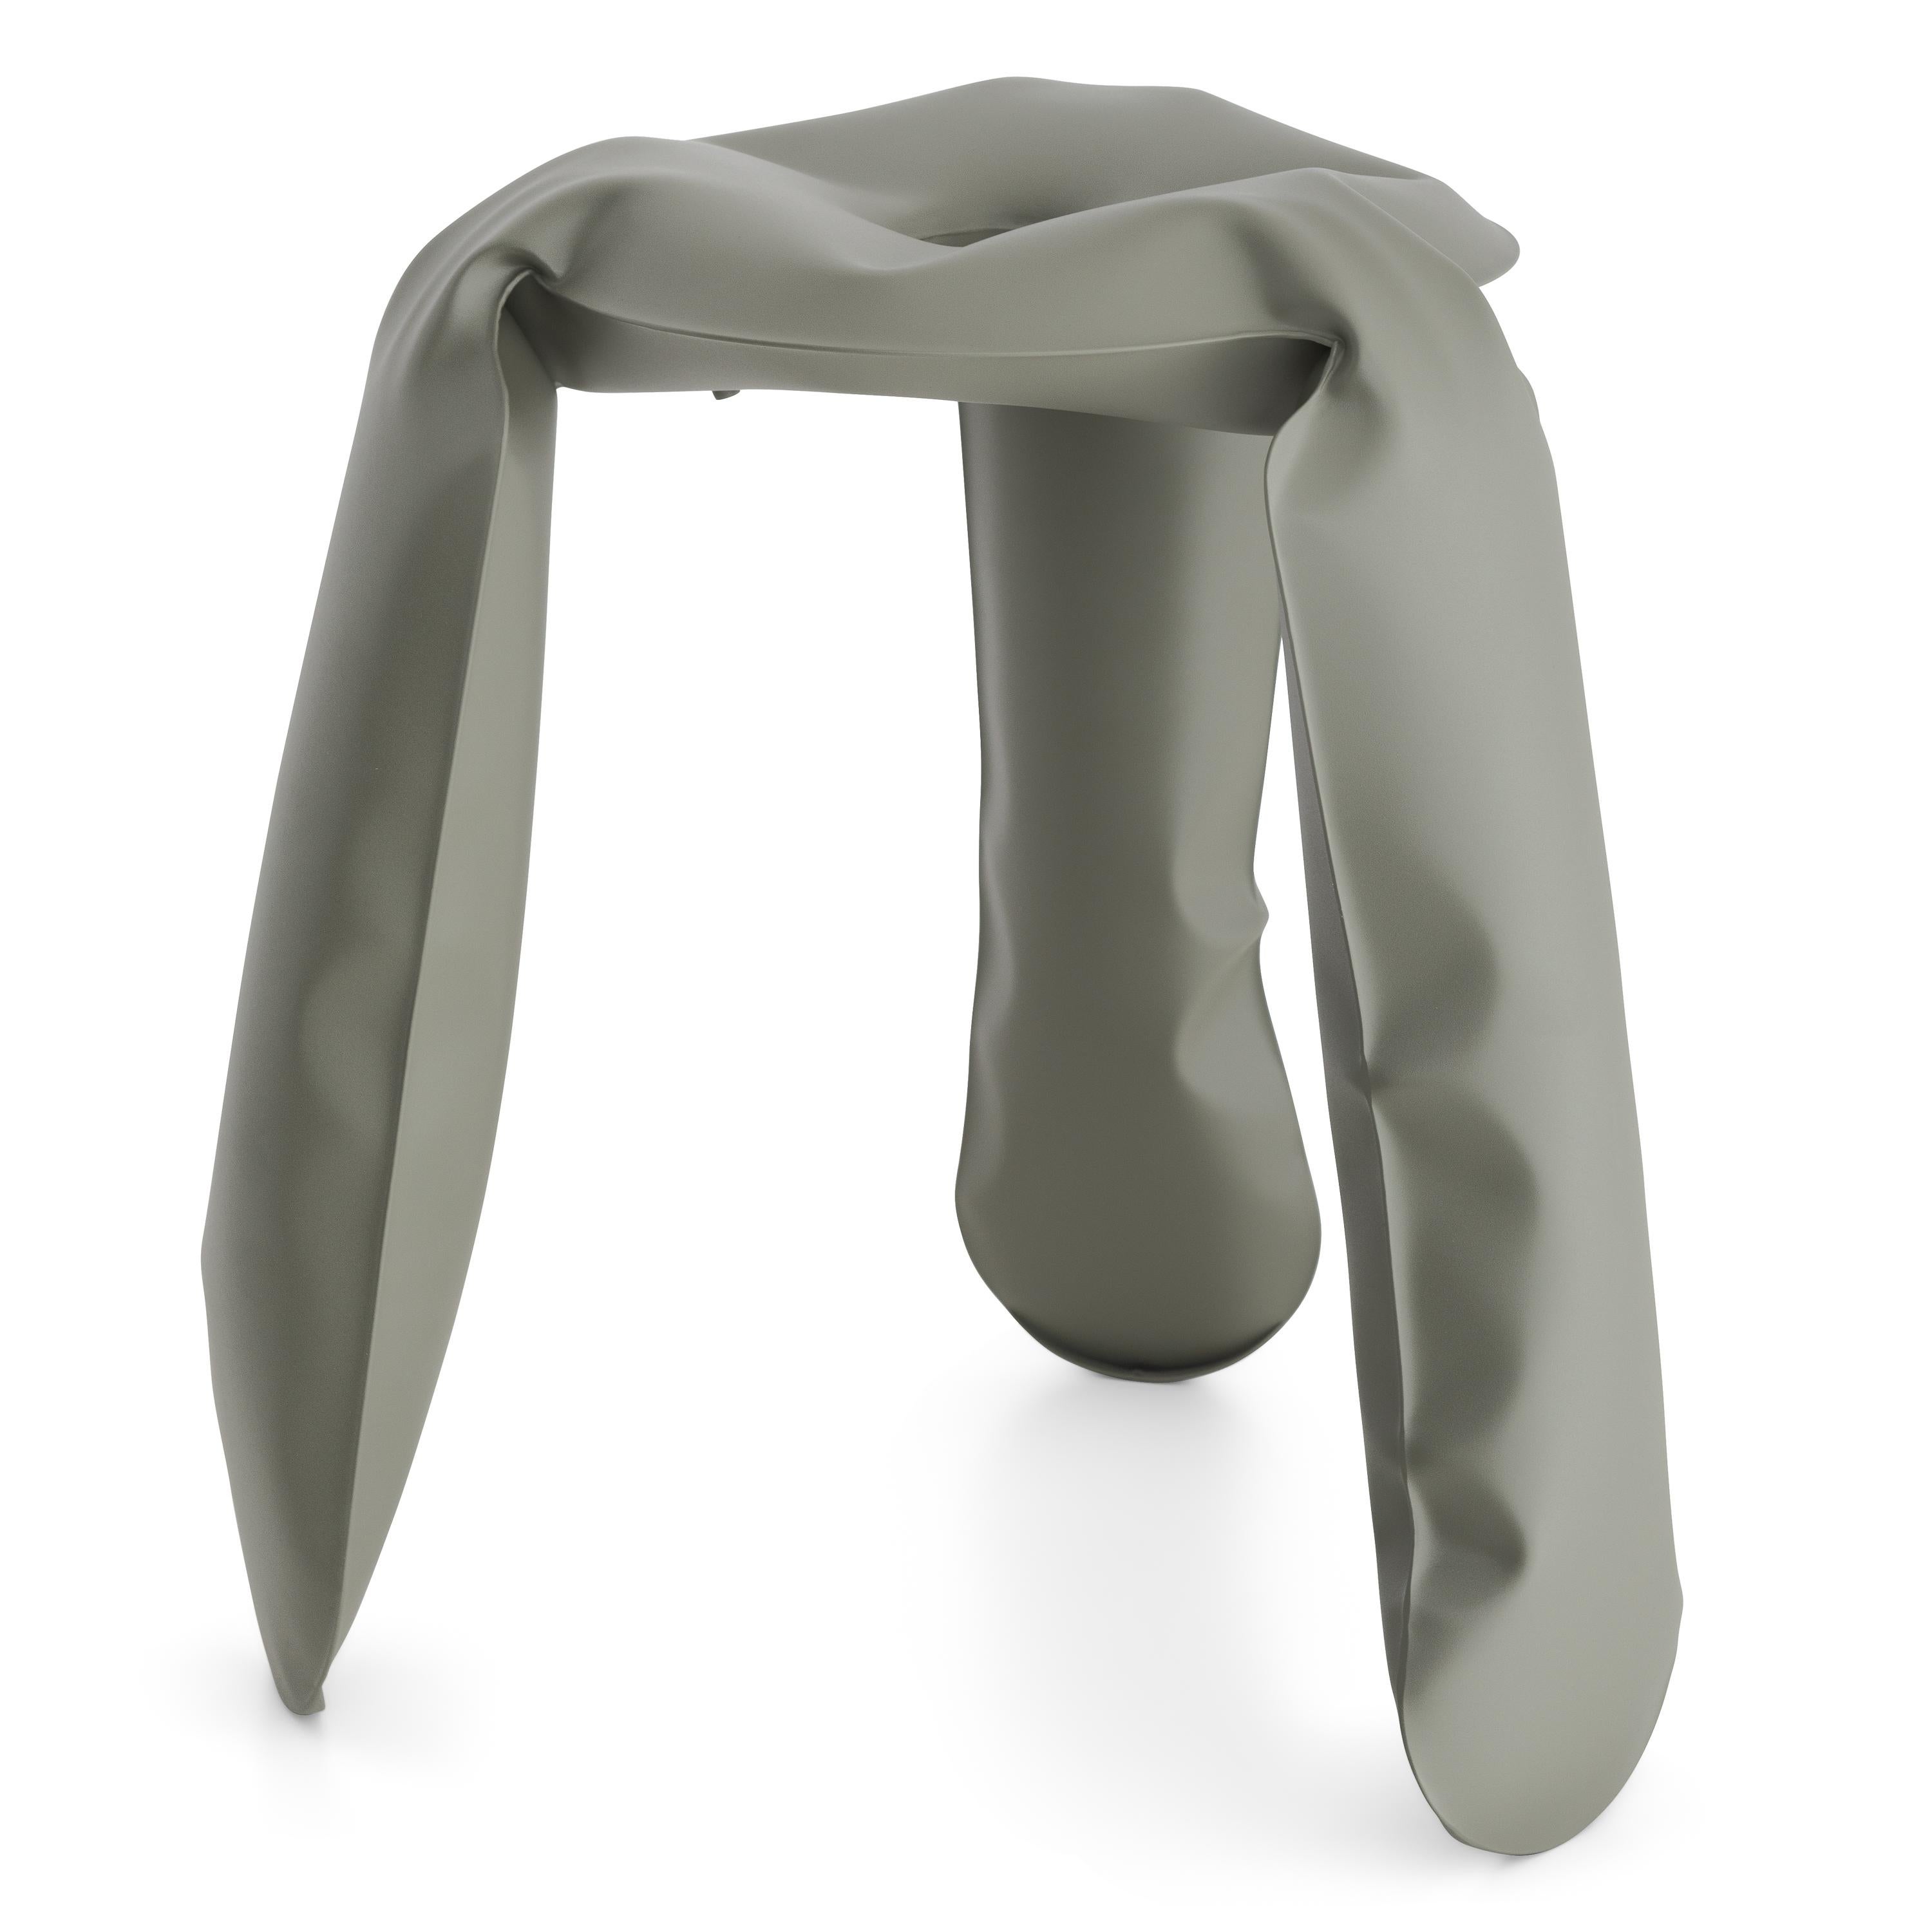 Moss Gray Steel Standard Plopp stool by Zieta
Dimensions: D 35 x H 50 cm 
Material: Carbon steel. 
Finish: Powder-coated.
Available in colors: Graphite, Moss Grey, Umbra Grey, Beige Grey, Blue Grey. Available in Stainless Steel, Aluminum, and Carbon